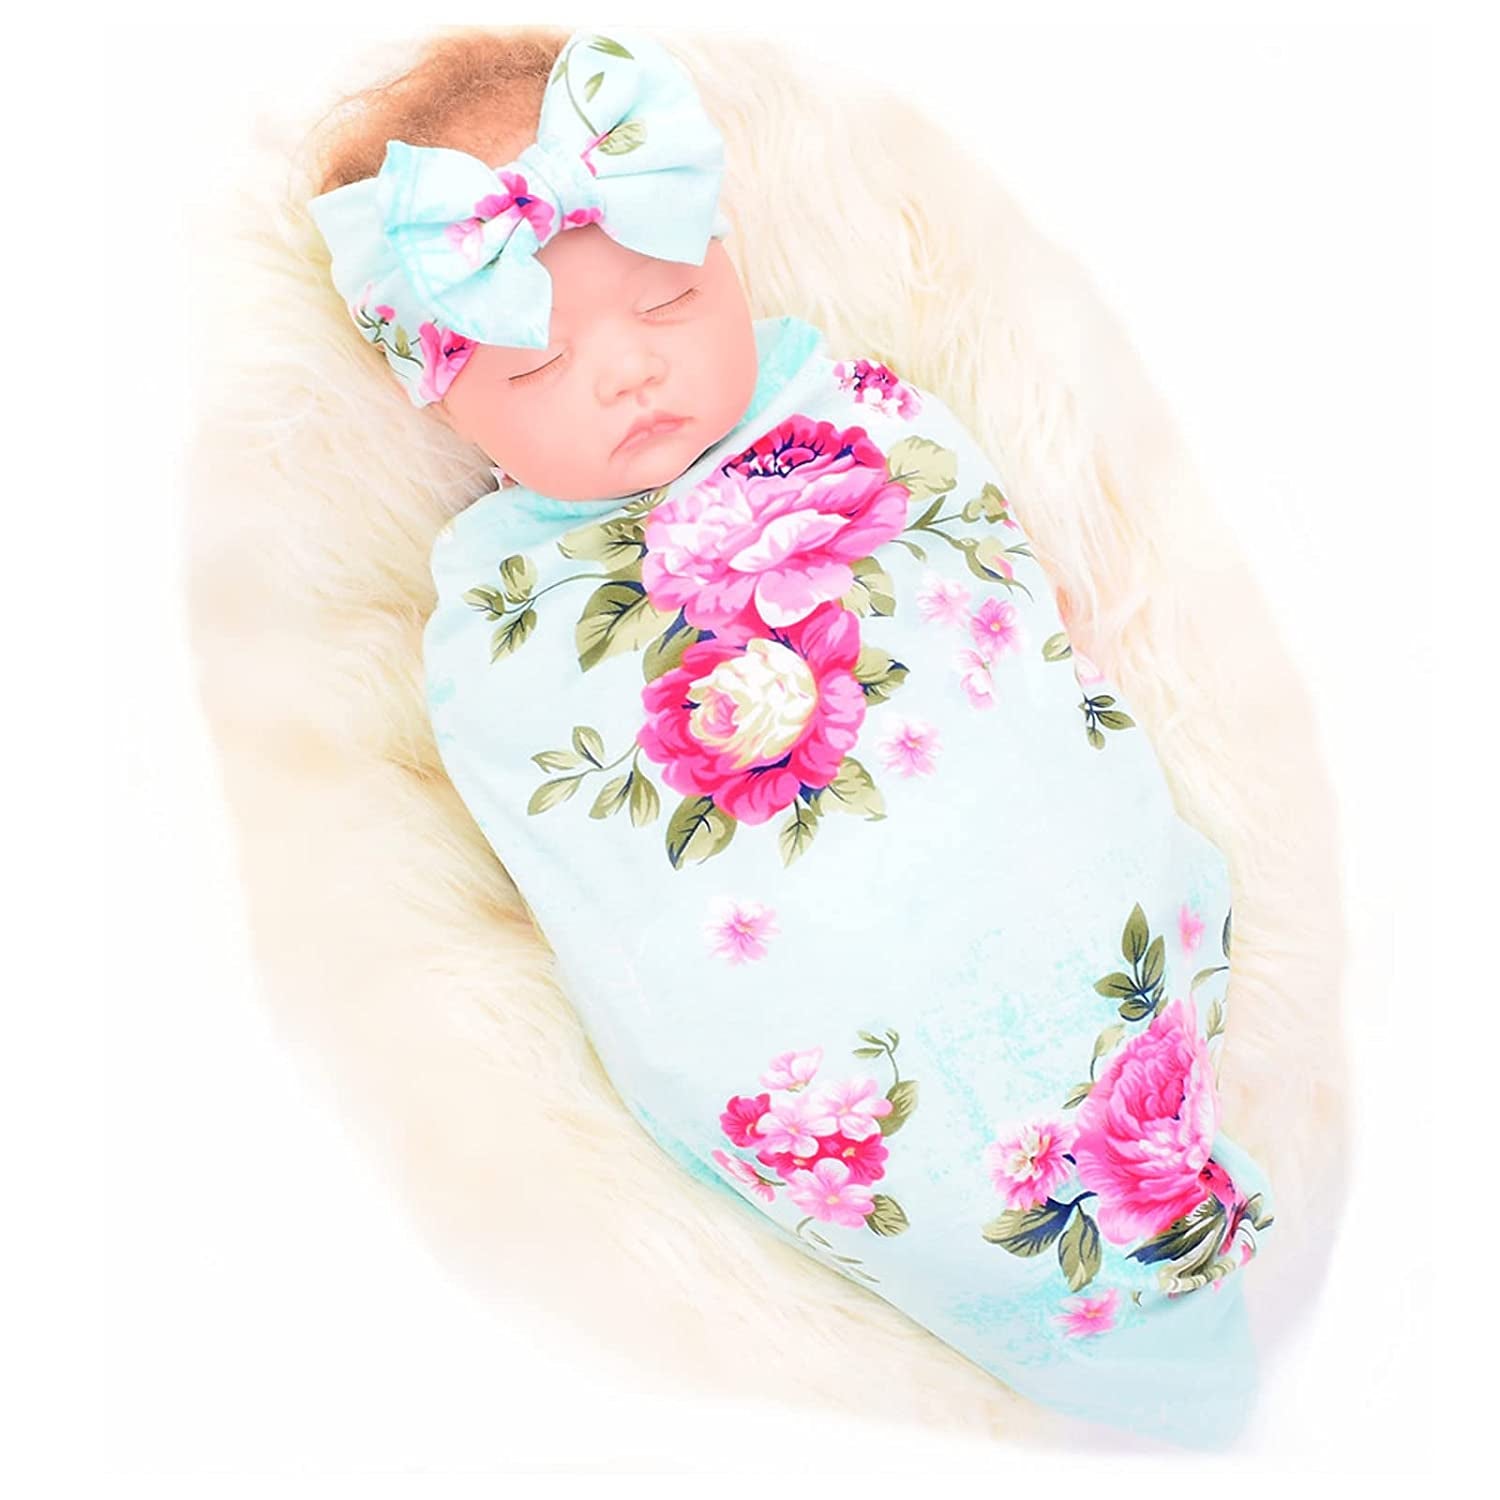 Model wrapped in blue and pink floral baby blanket with matching headband with bow